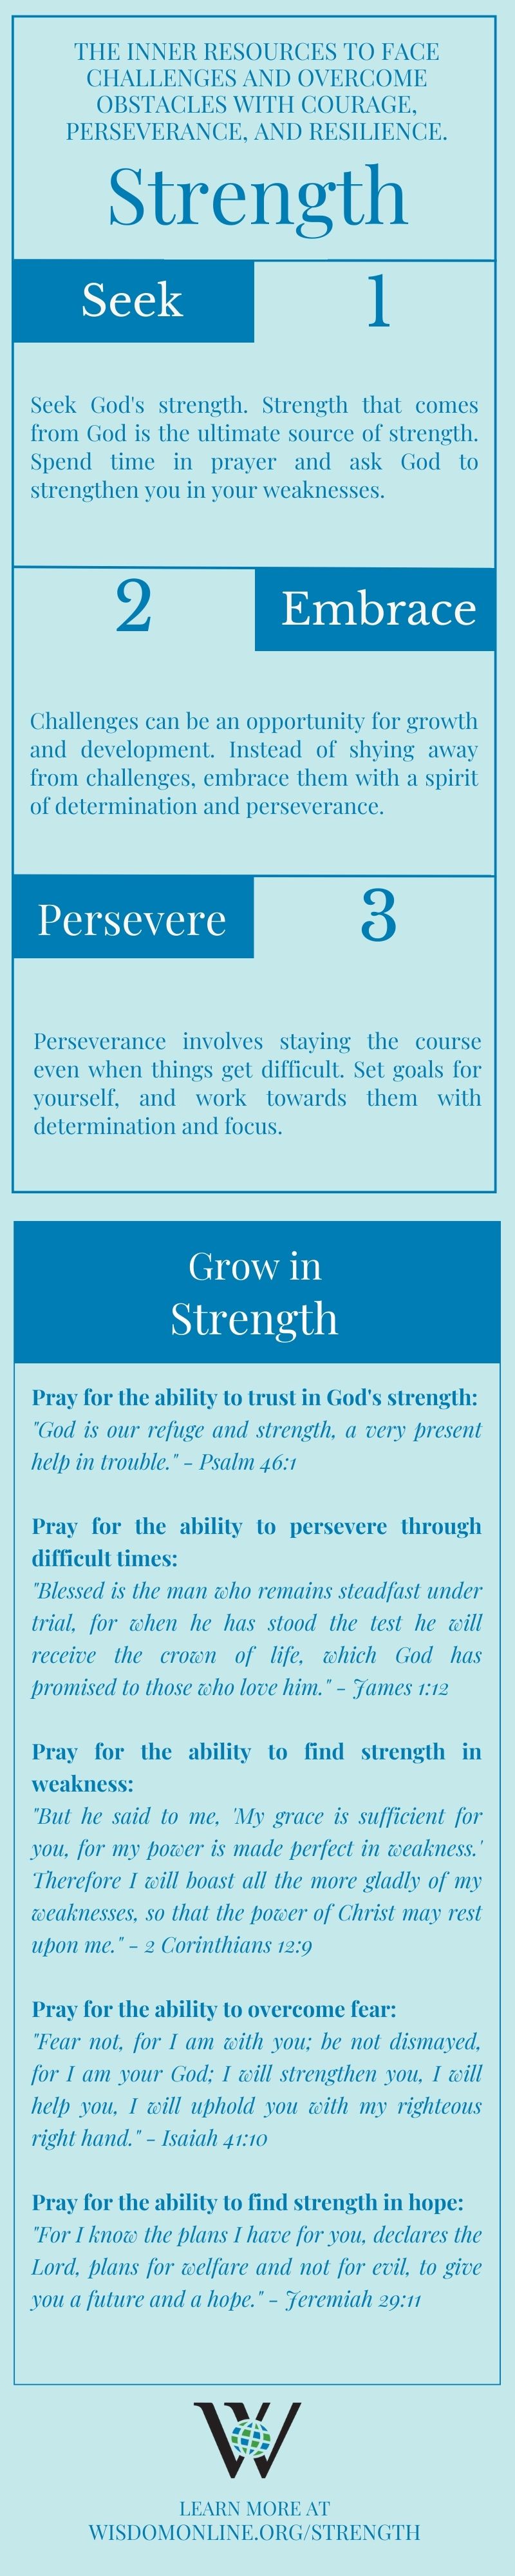 Infographic on the Biblical characteristic of Strength